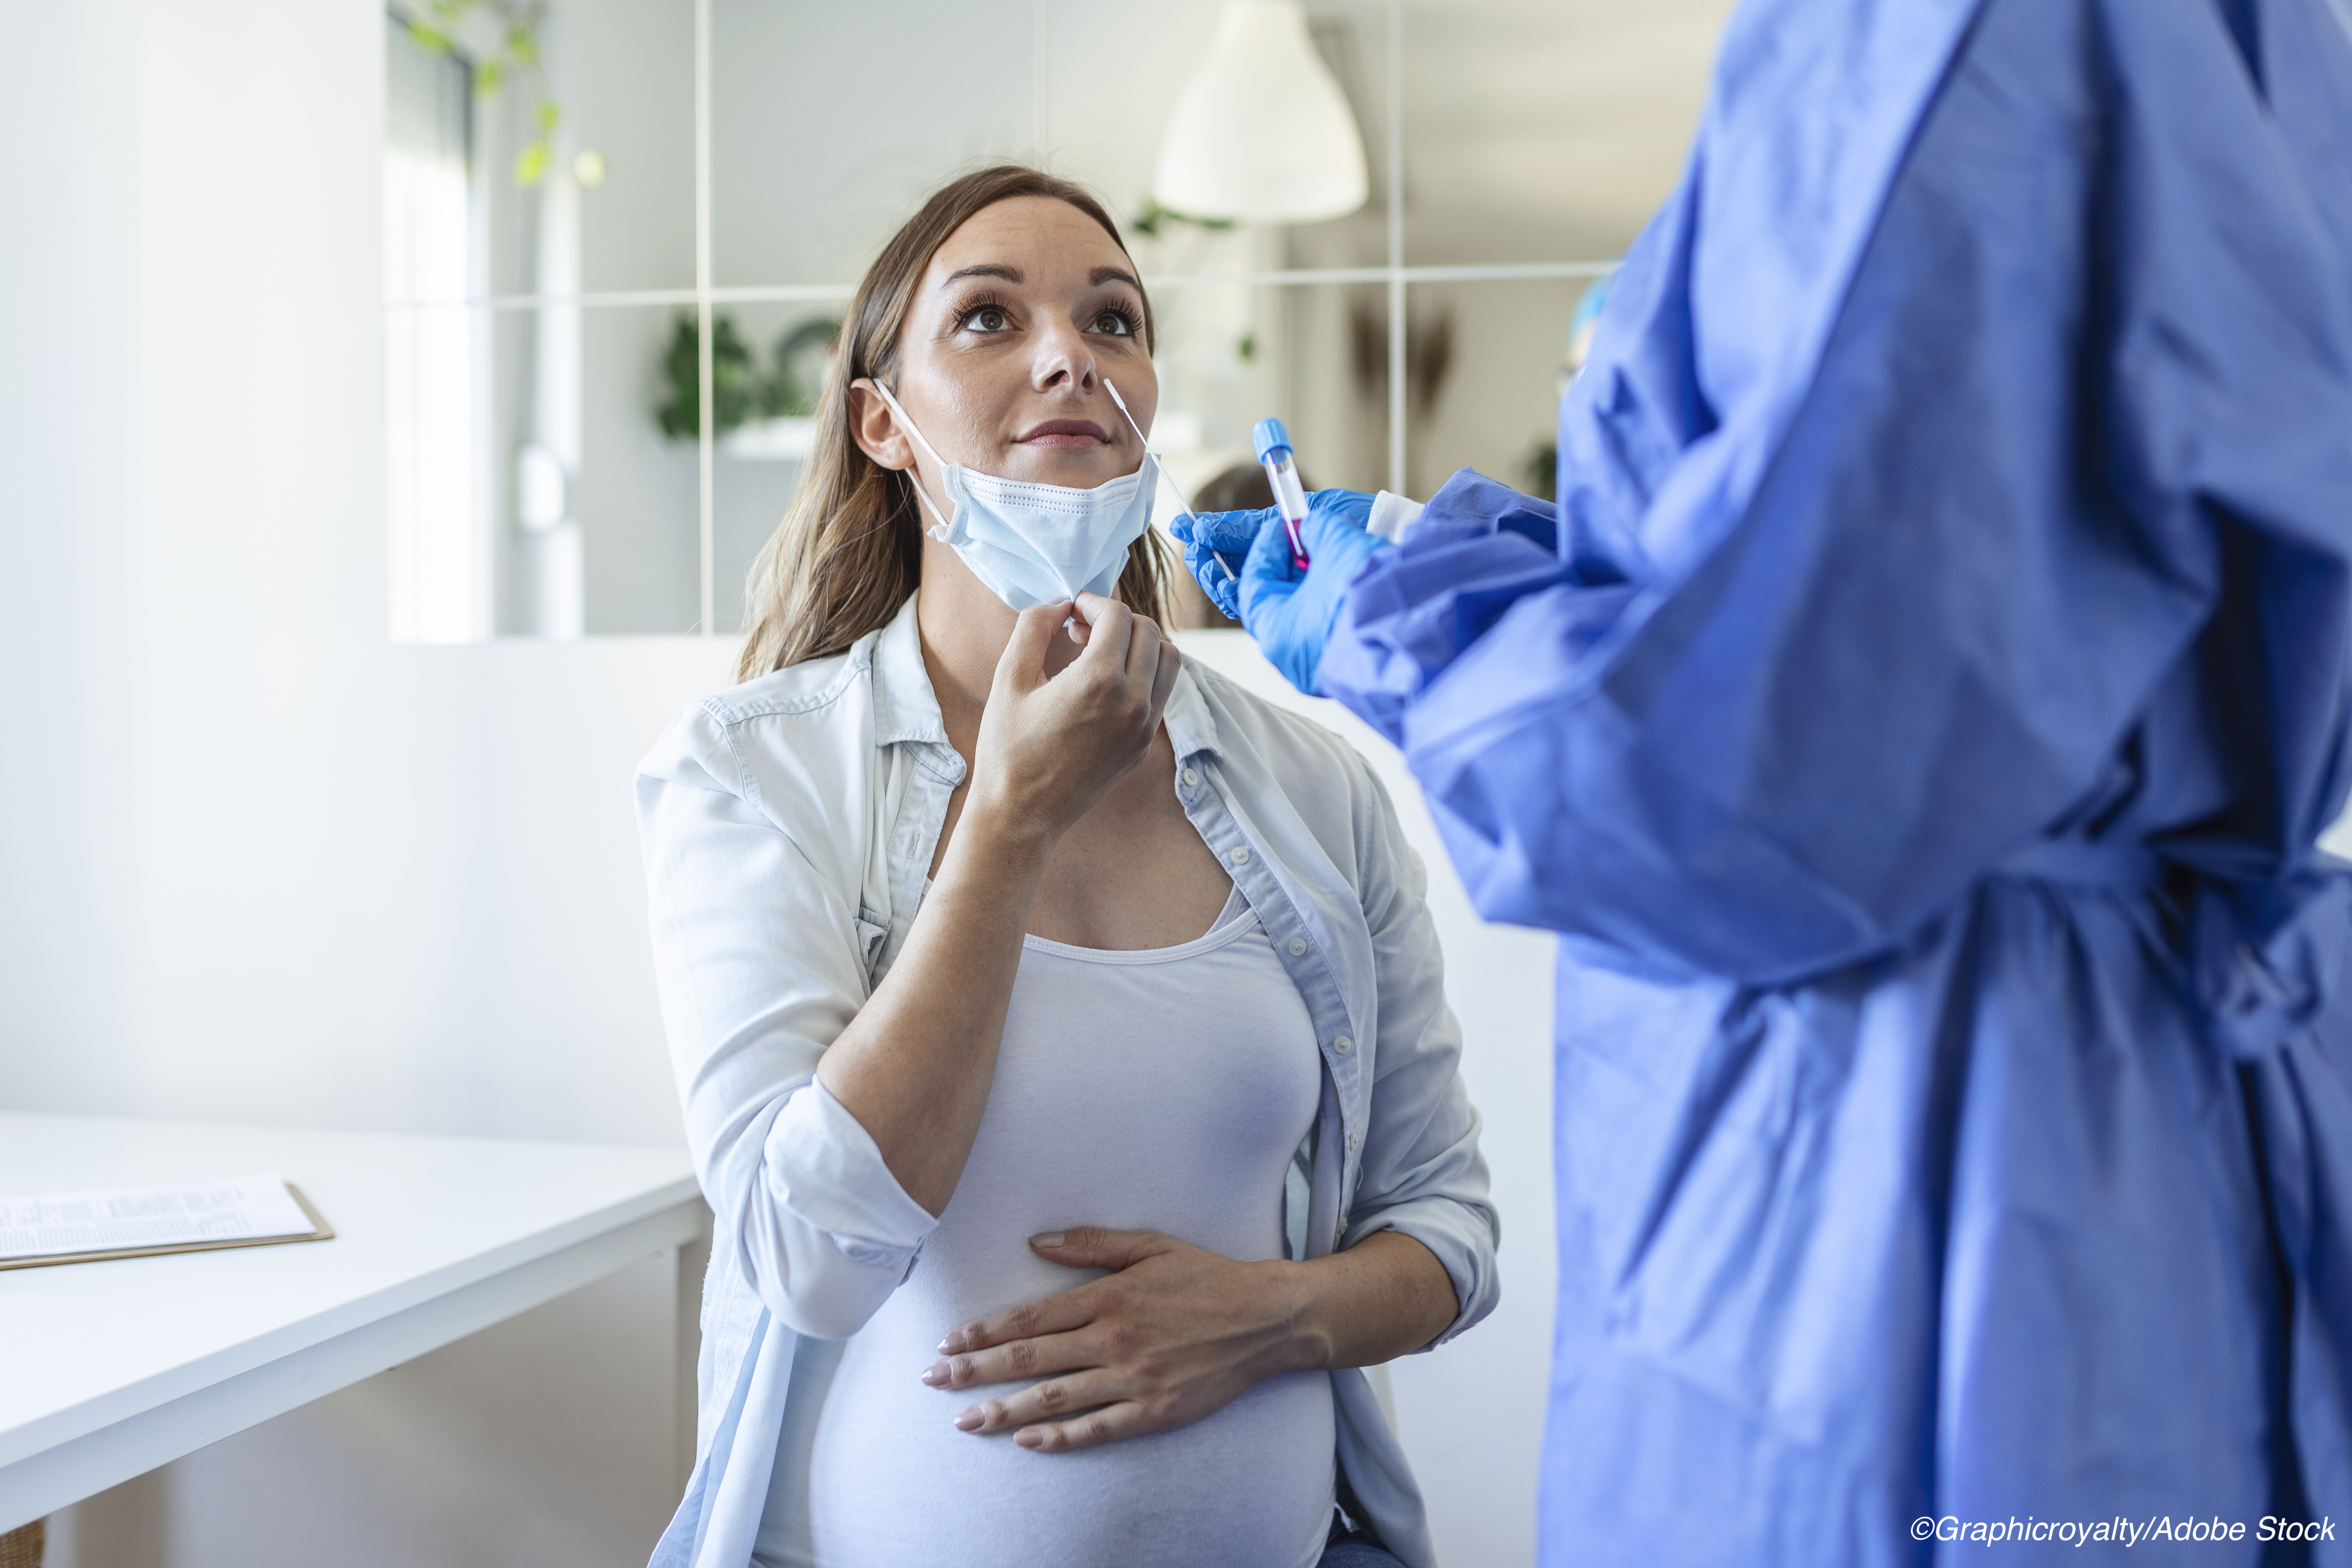 Covid-19: Virus During Pregnancy Increases Birth Complication Risk